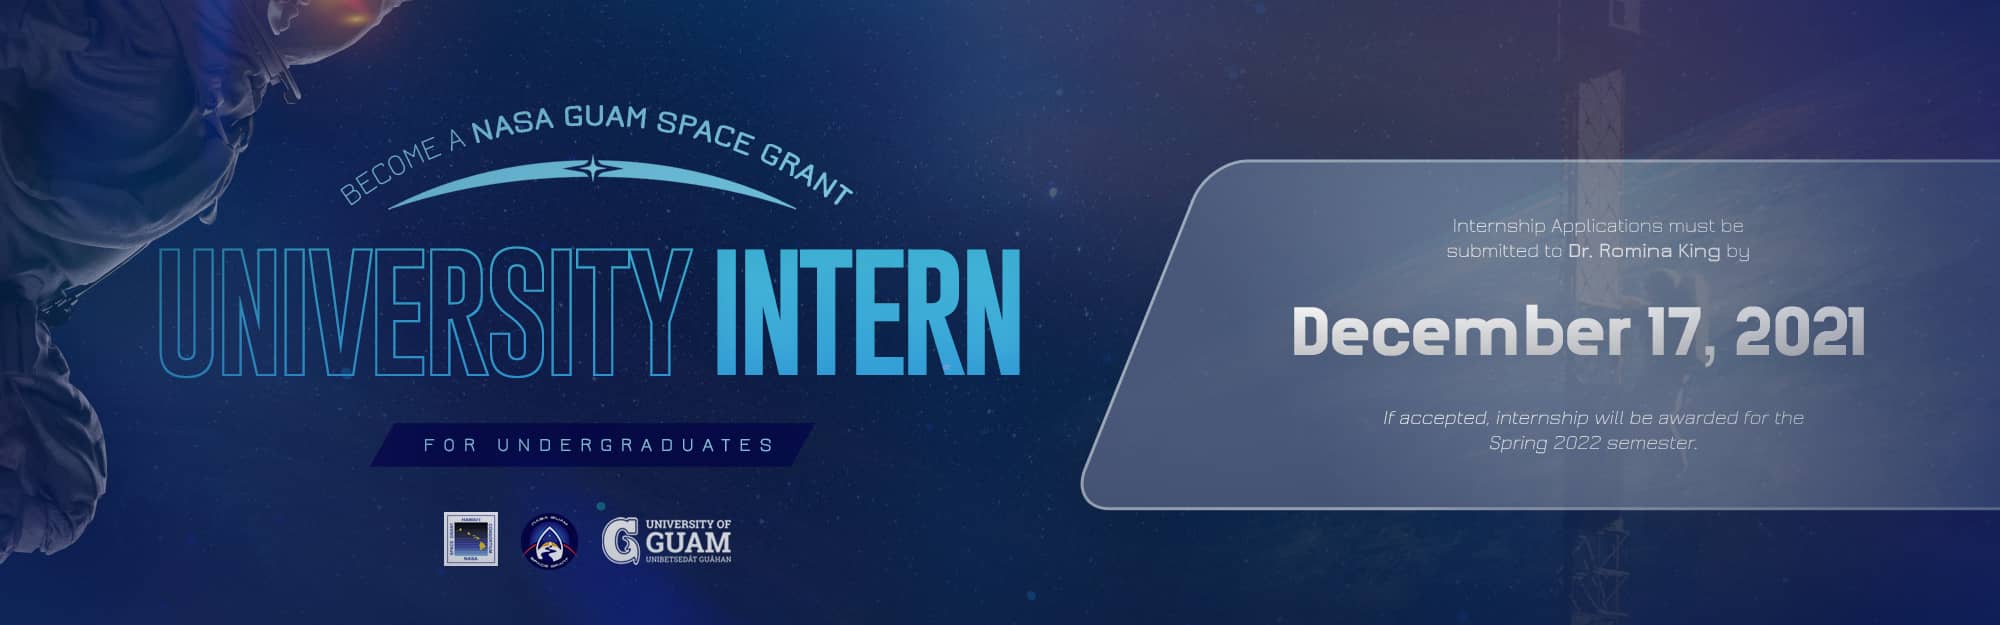 Apply to become a NASA Guam Space Grant University Intern!